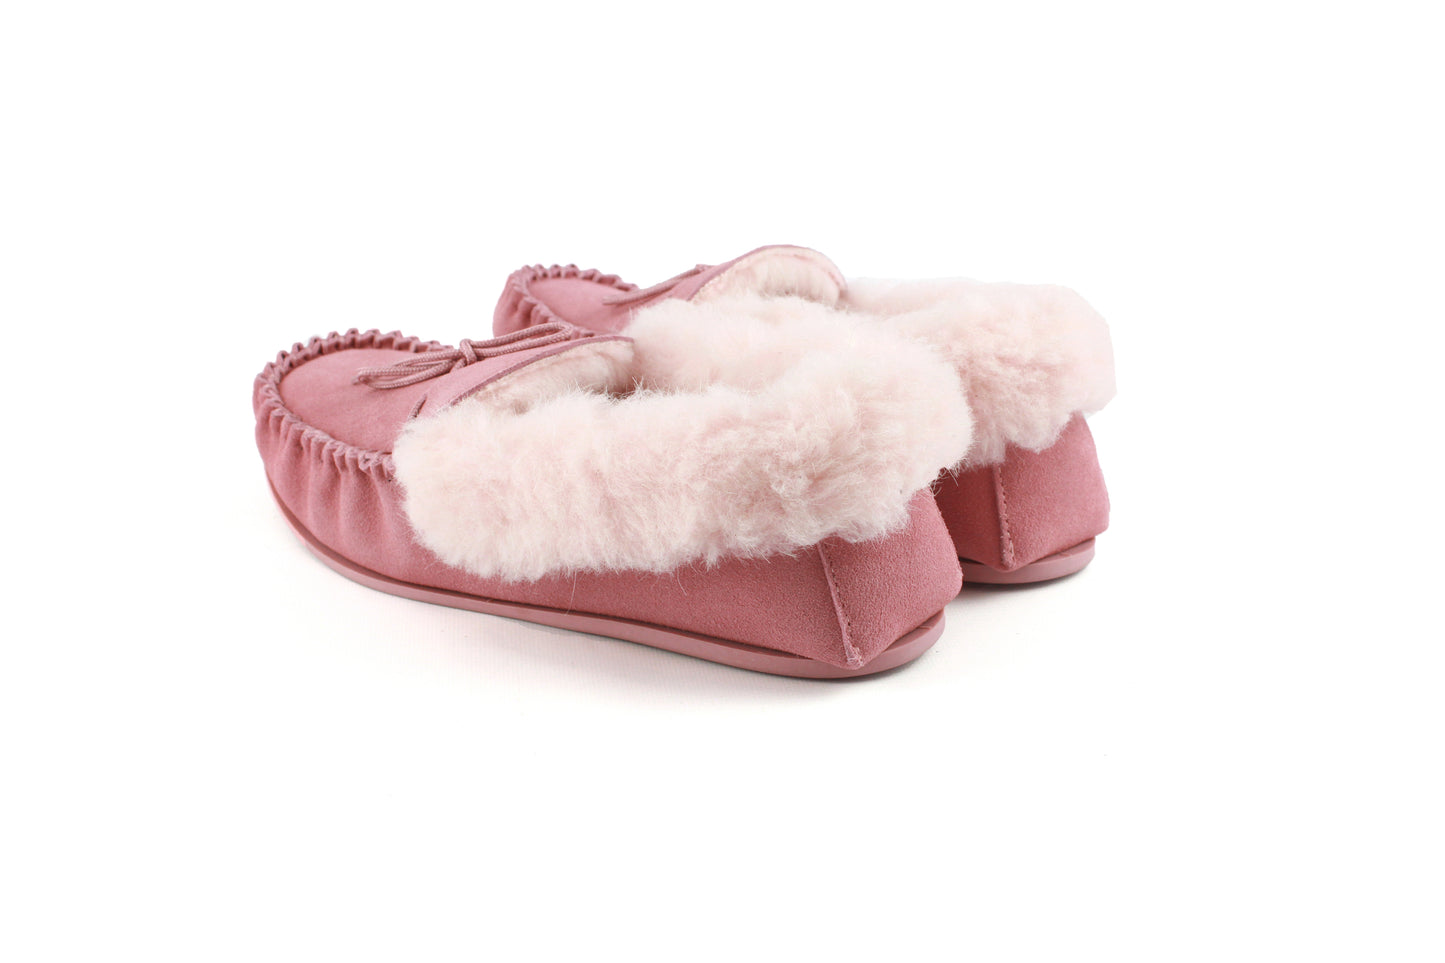 Blush Pink Willow Moccasin slippers